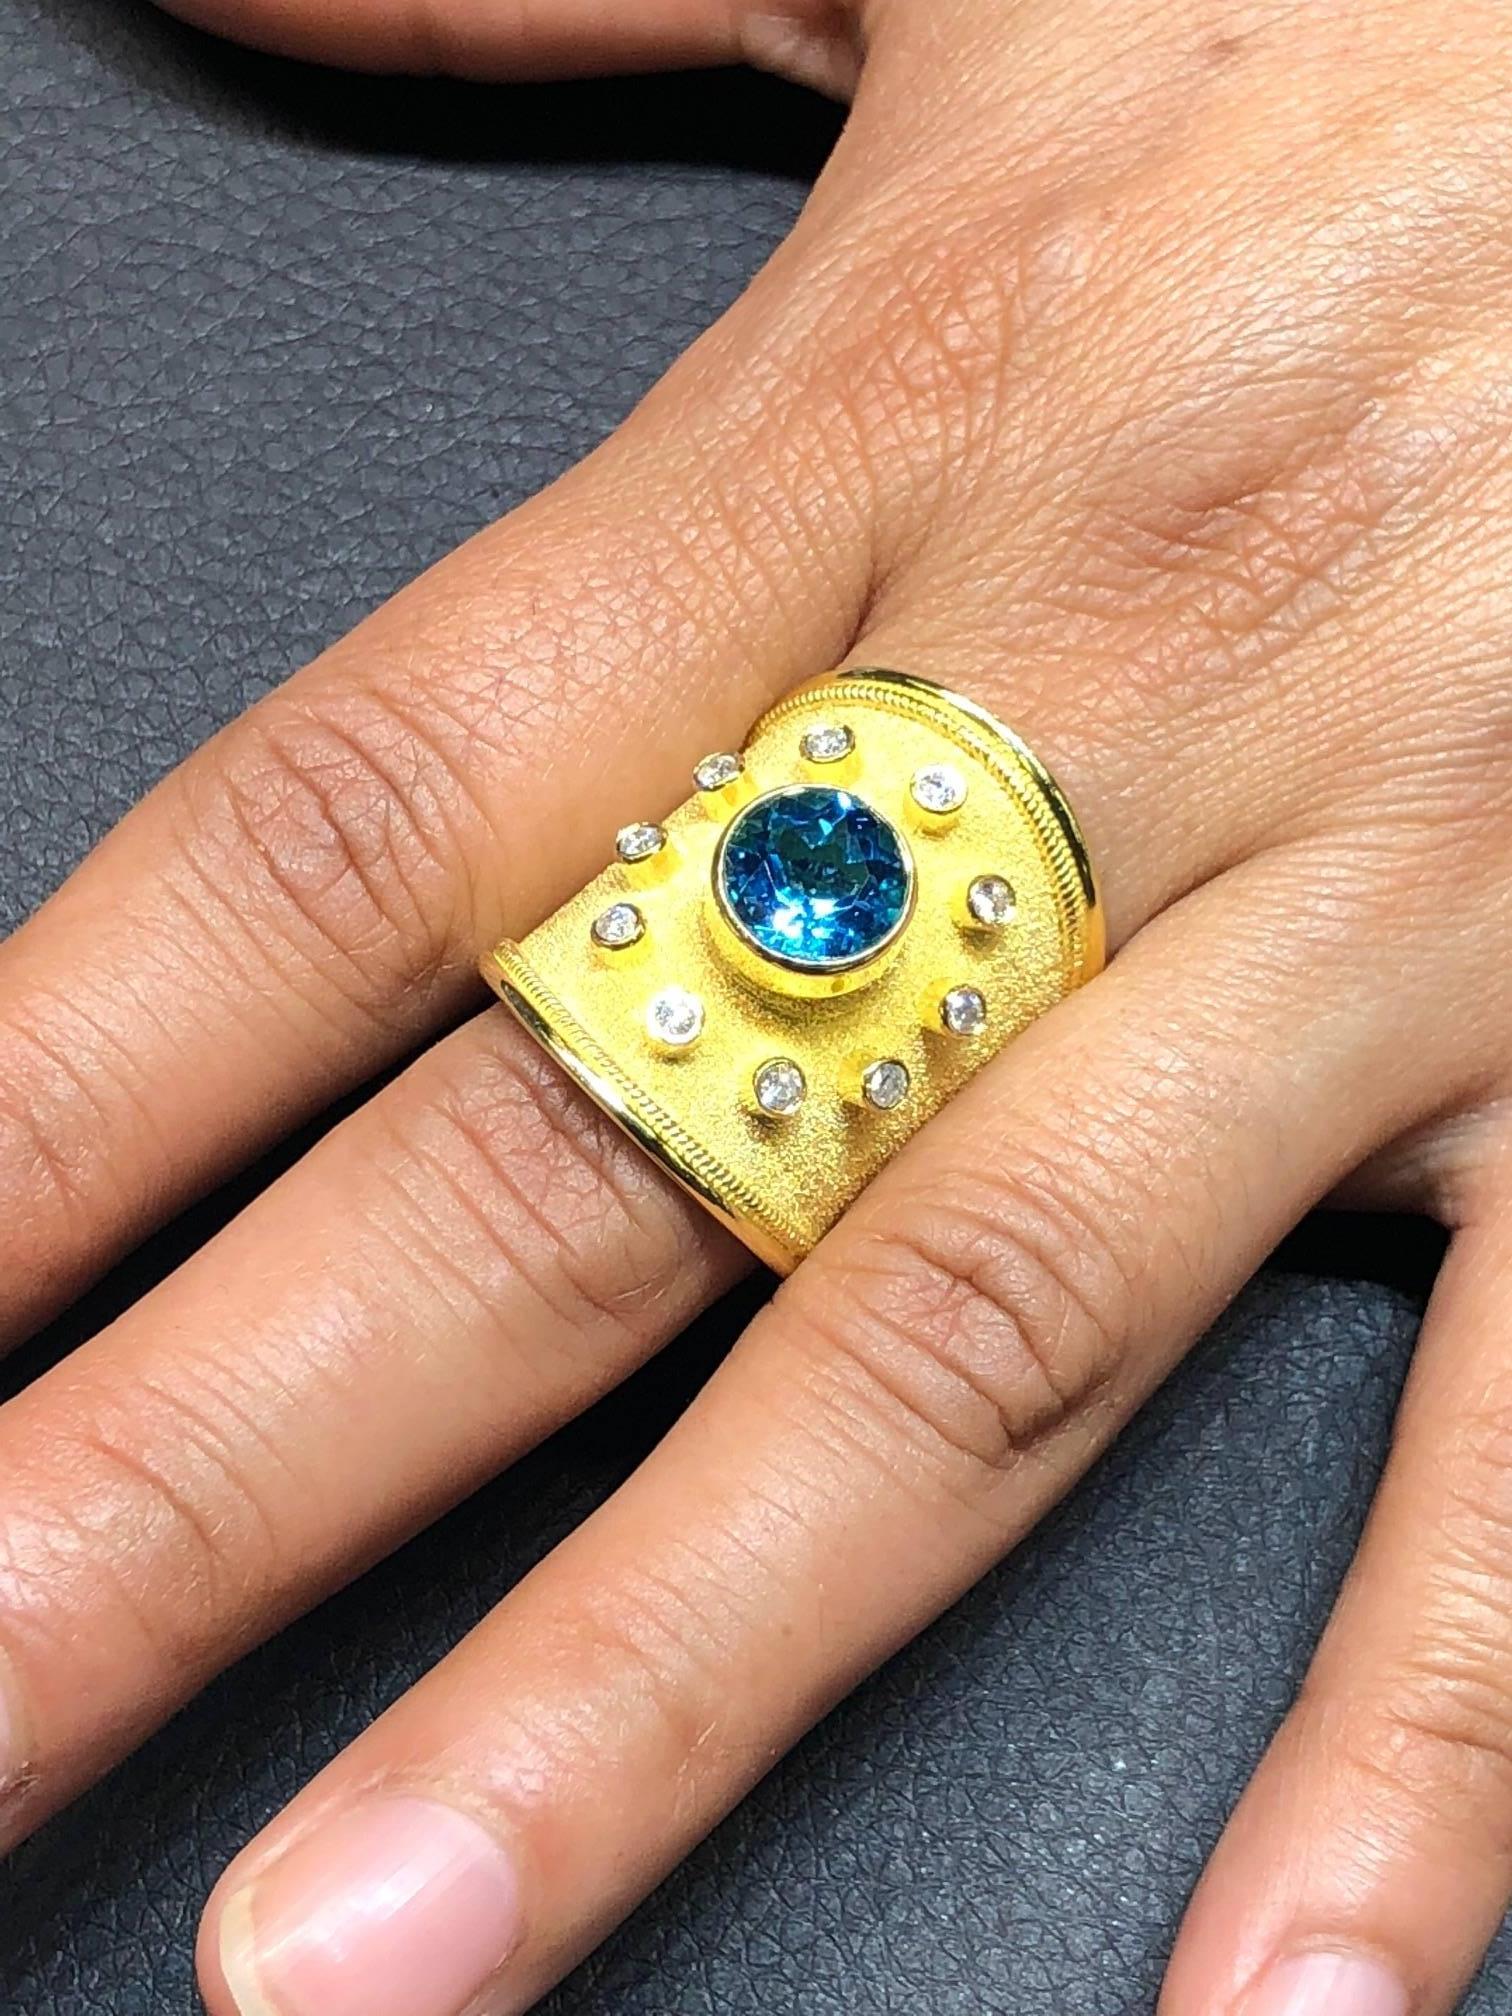 S.Georgios designer 18 Karat Solid Yellow Gold Ring all handmade with the Byzantine Granulation workmanship and a unique velvet background. The ring features a Brilliant cut Sky Blue Topaz total weight of 3.28 Carat and 10 brilliant-cut White